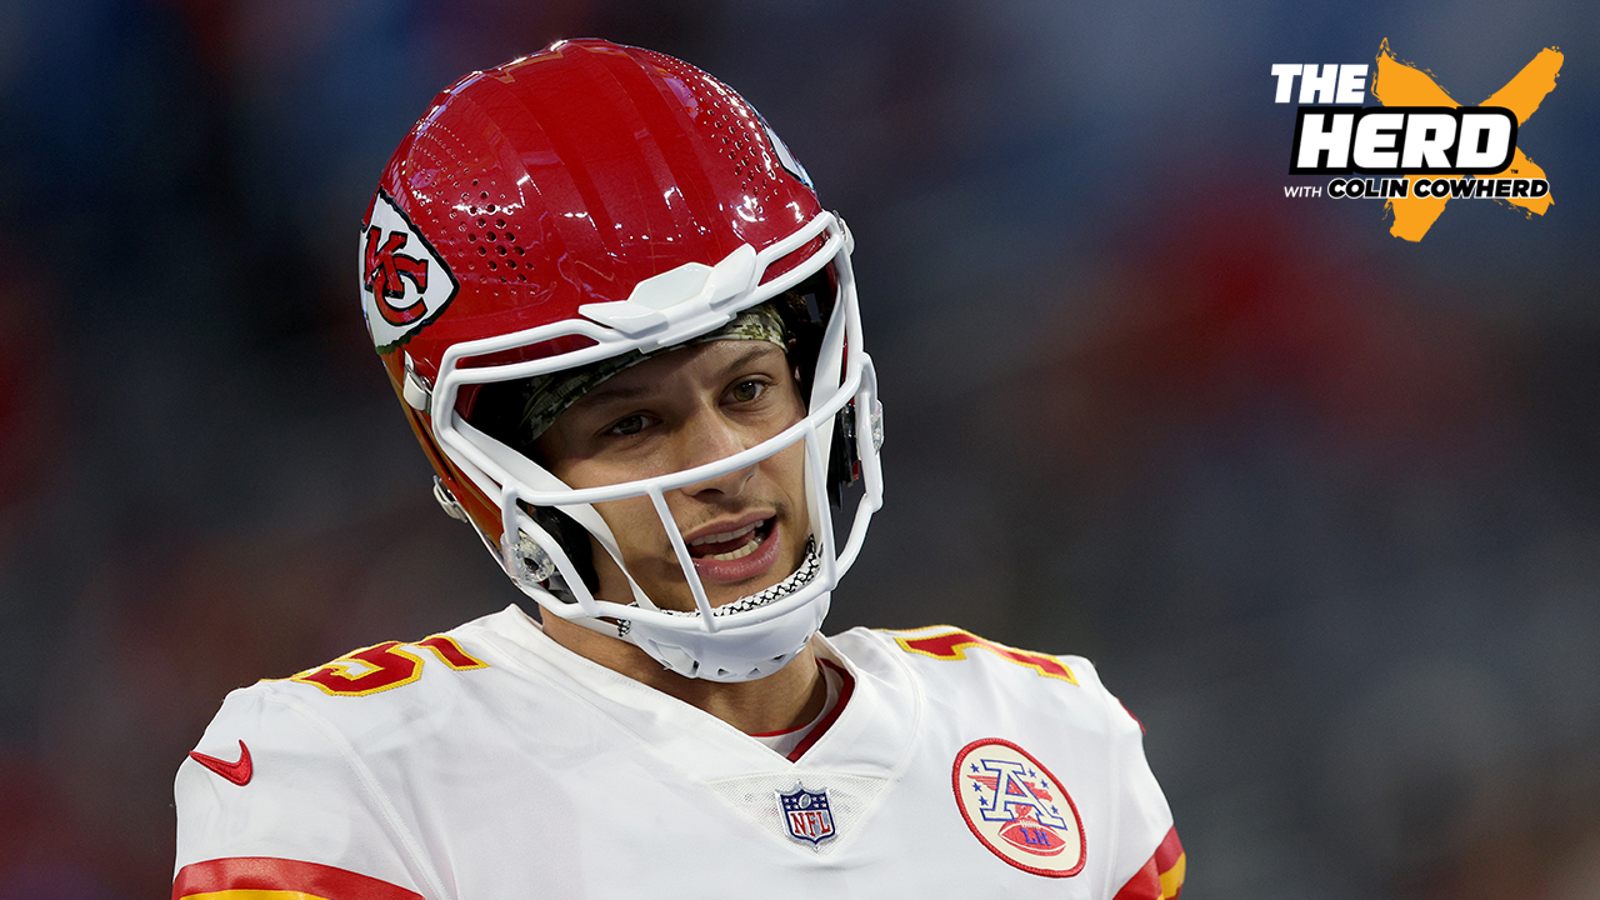 Patrick Mahomes, Chiefs toughest team to beat in NFL? 